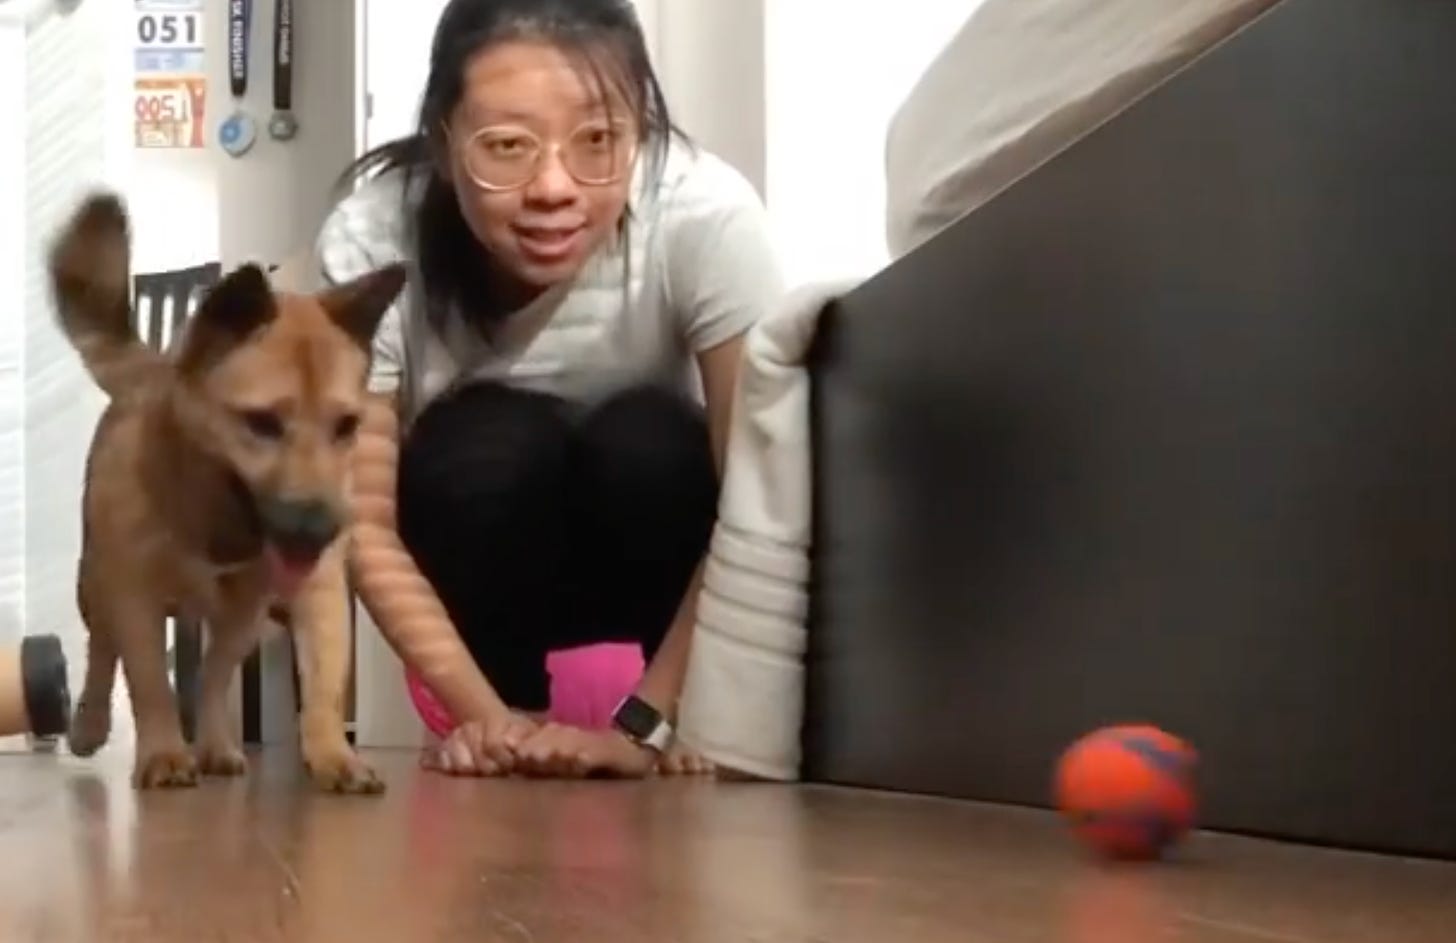 A small dog and a woman, looking excitedly at a ball nearby.